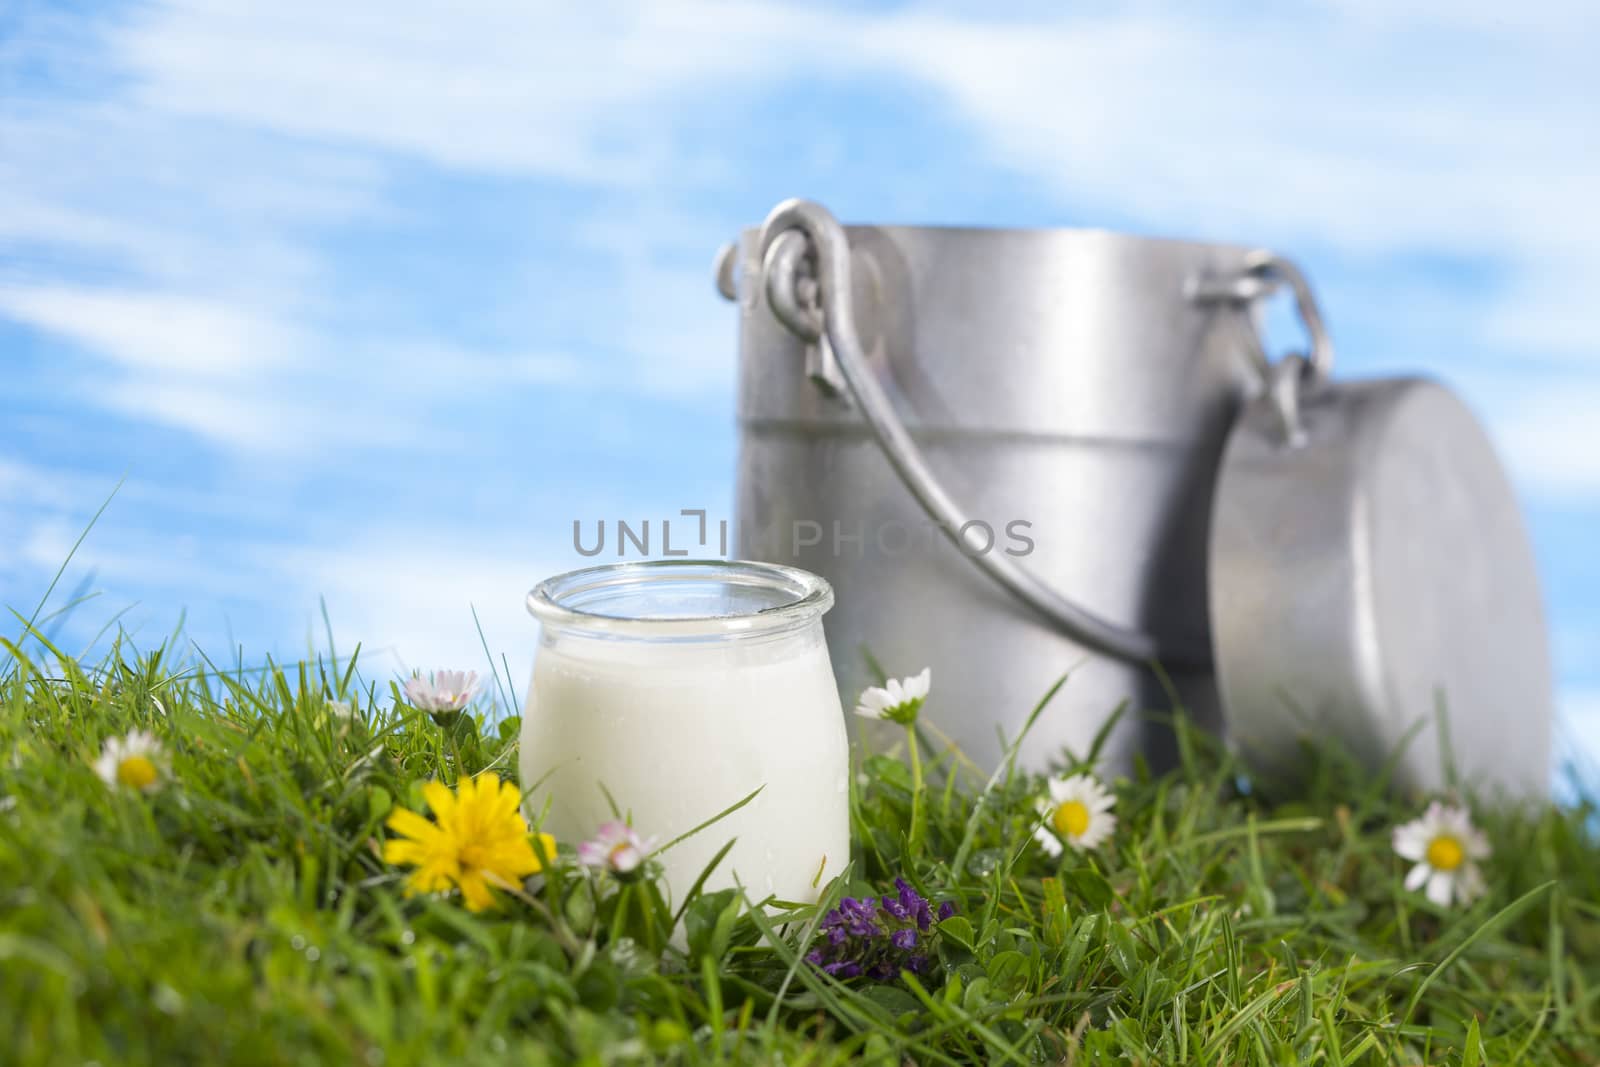 Yogurt and Old style milk jug on the grass with cflowers  the sky with clouds on the background.